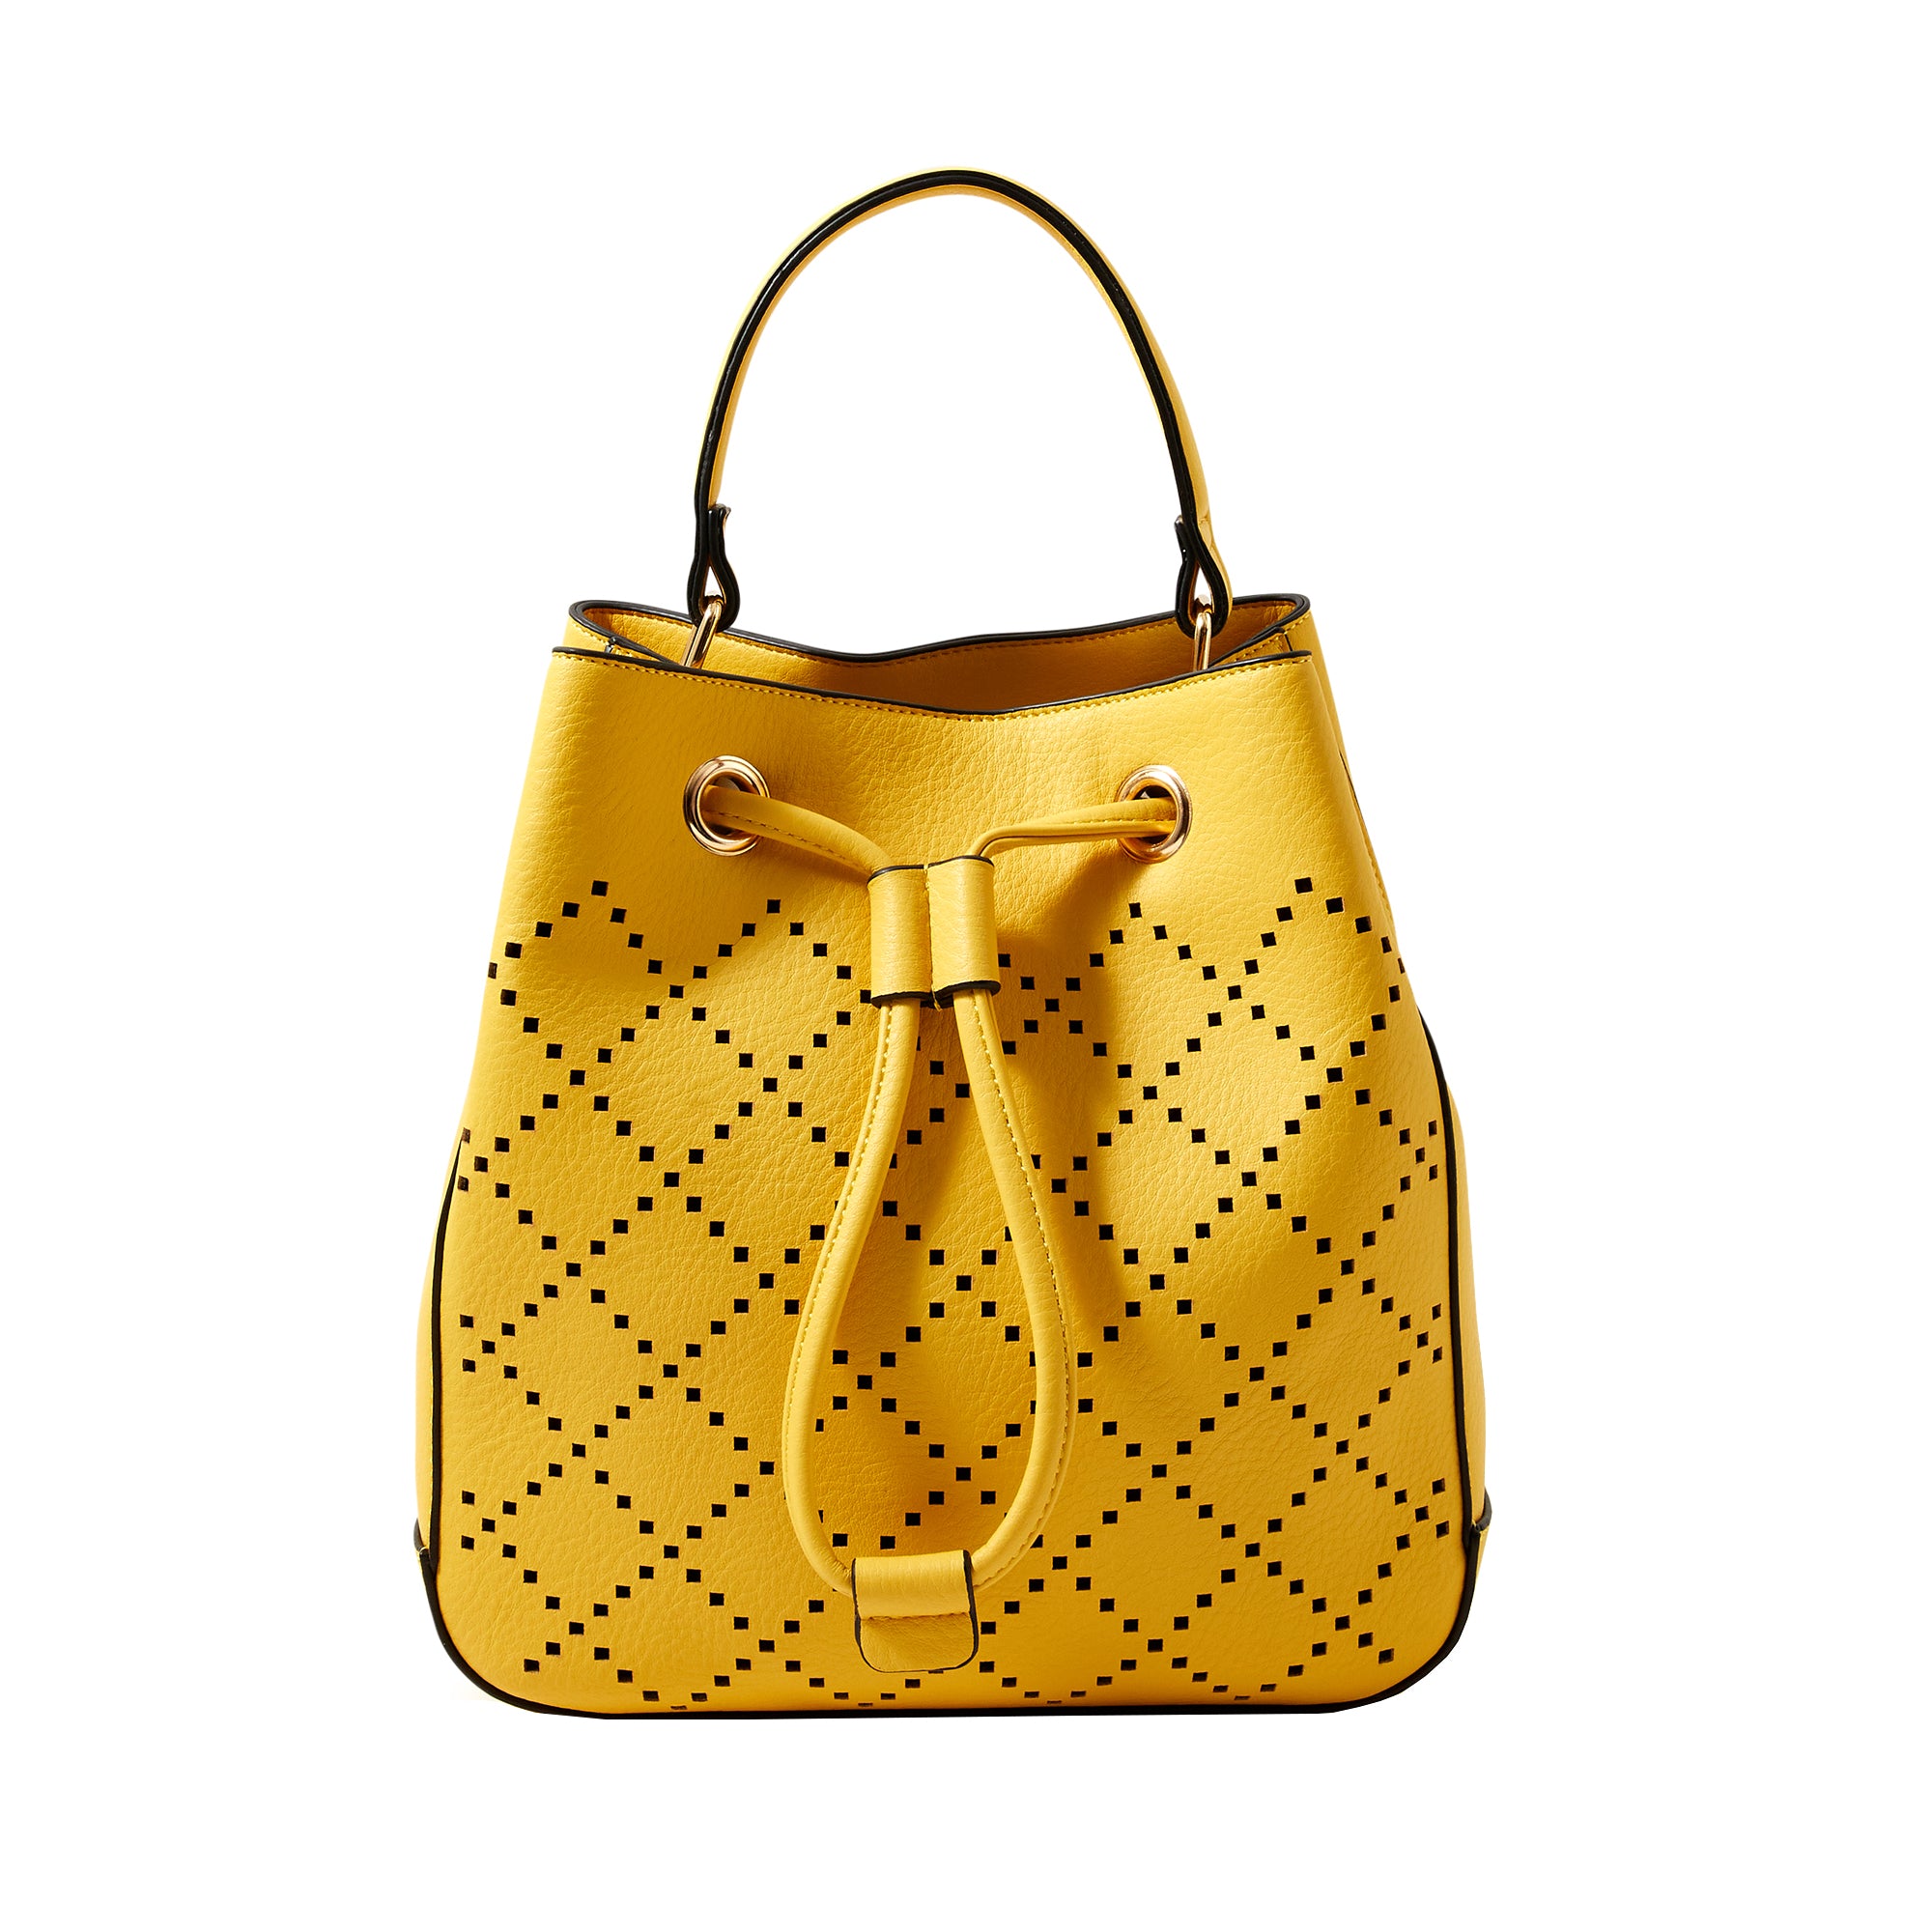 Buy Louis Vuitton Charm Croc Online In India -  India